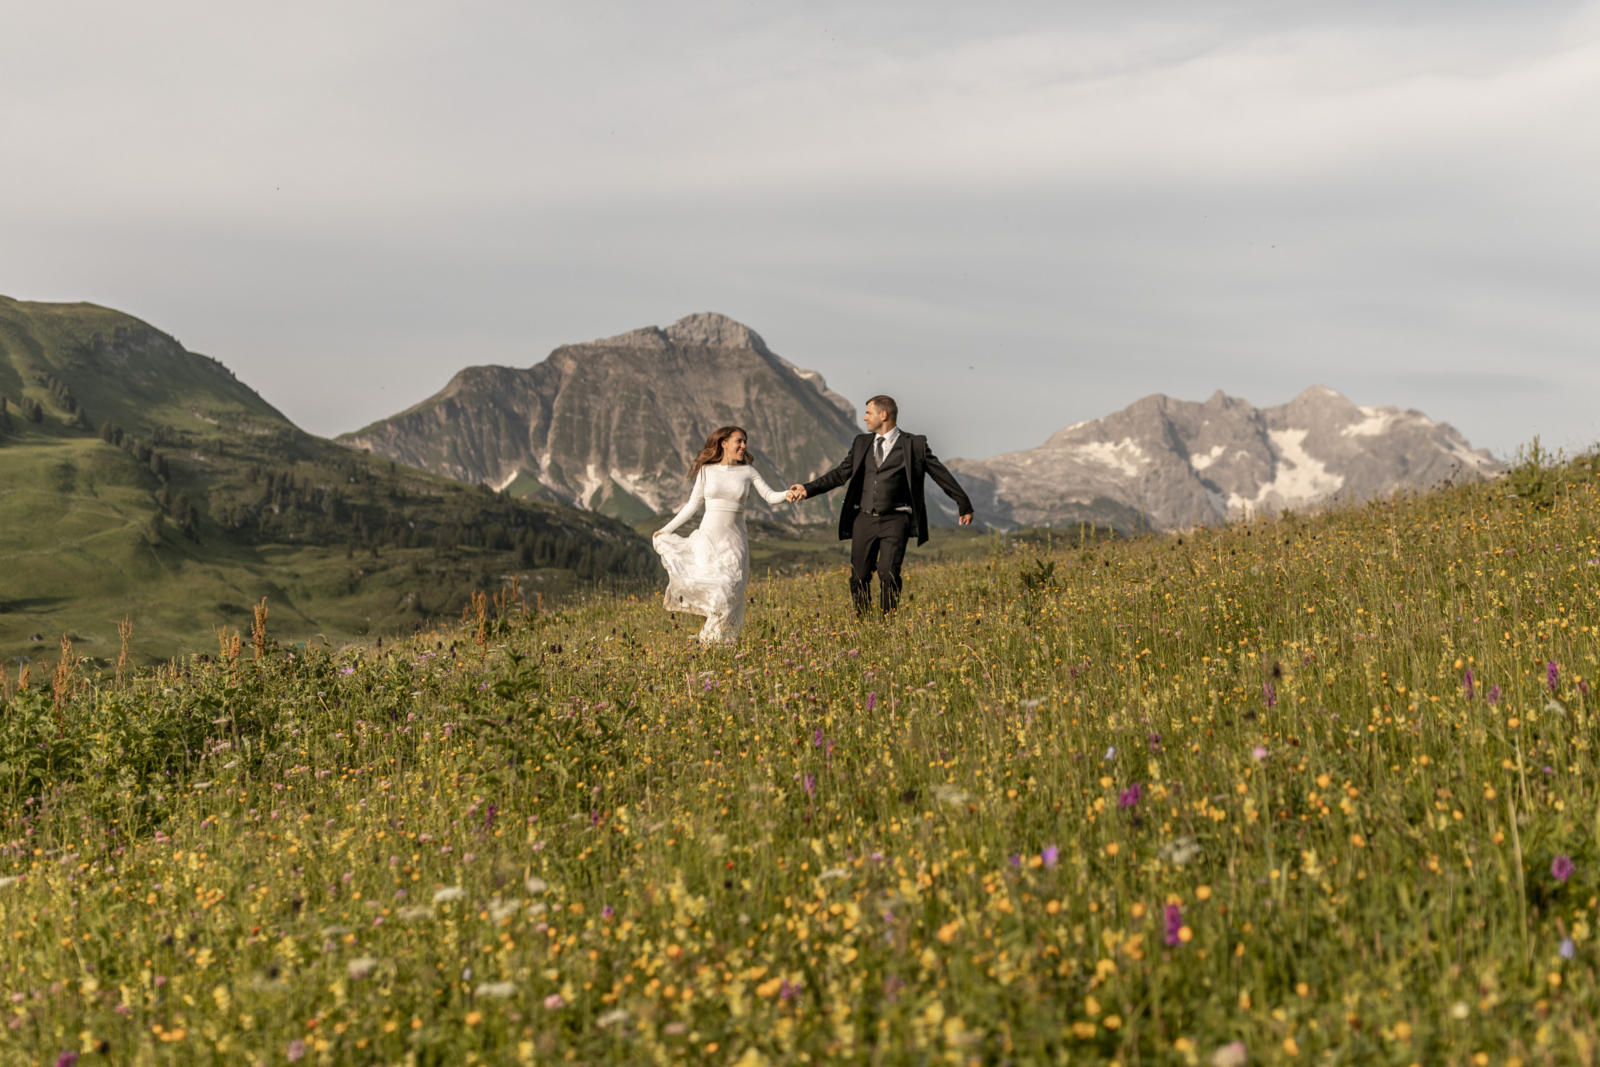 Elopement Photos Amidst the Blooming Wildflowers in the Alps